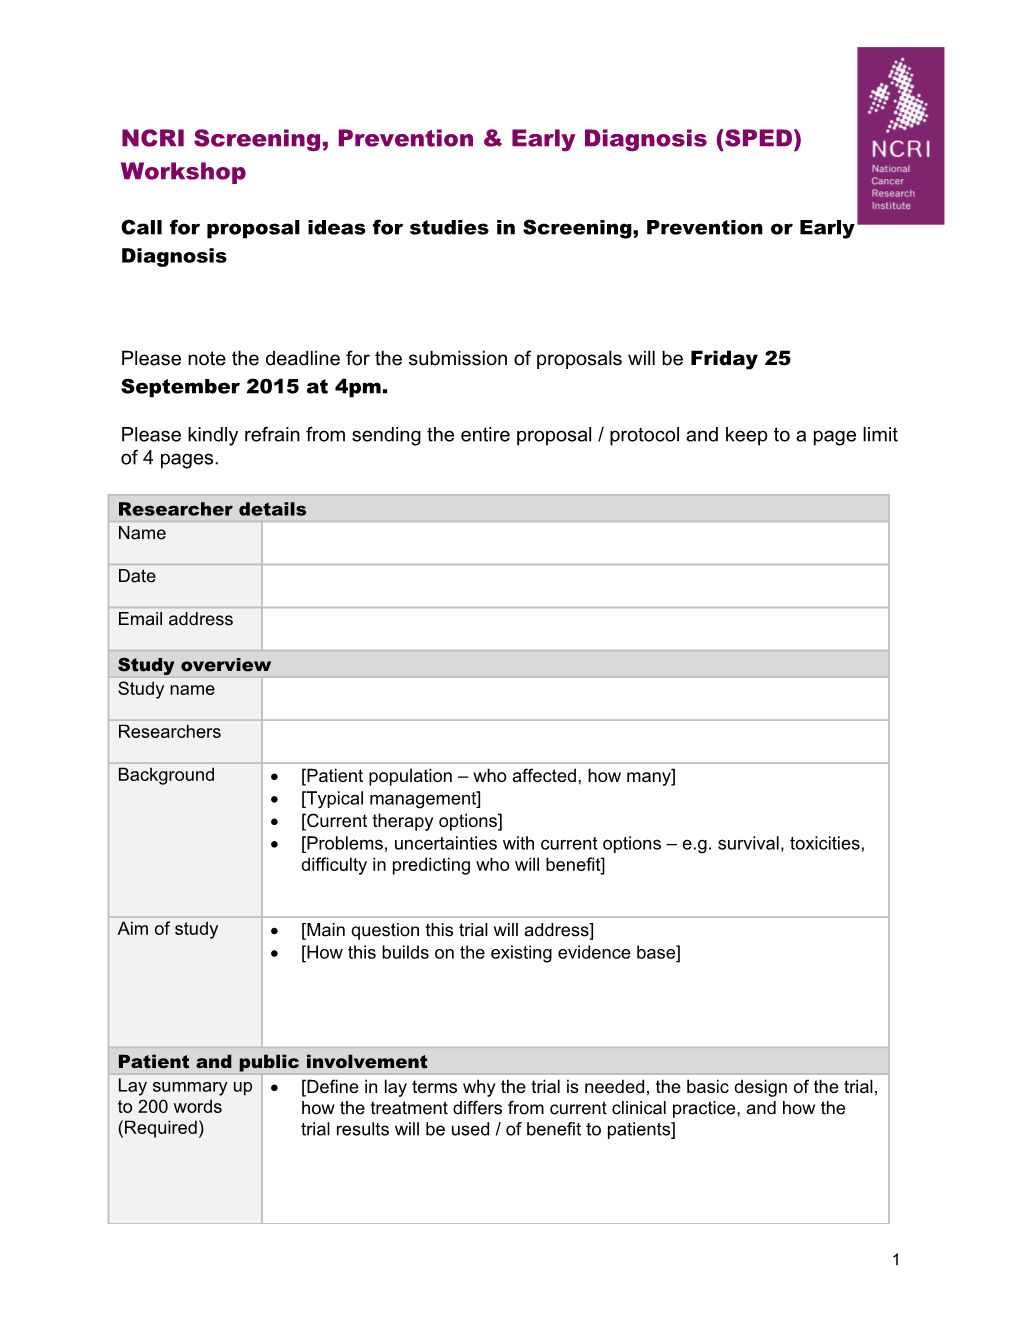 Call for Proposal Ideas for Studies in Screening, Prevention Or Early Diagnosis